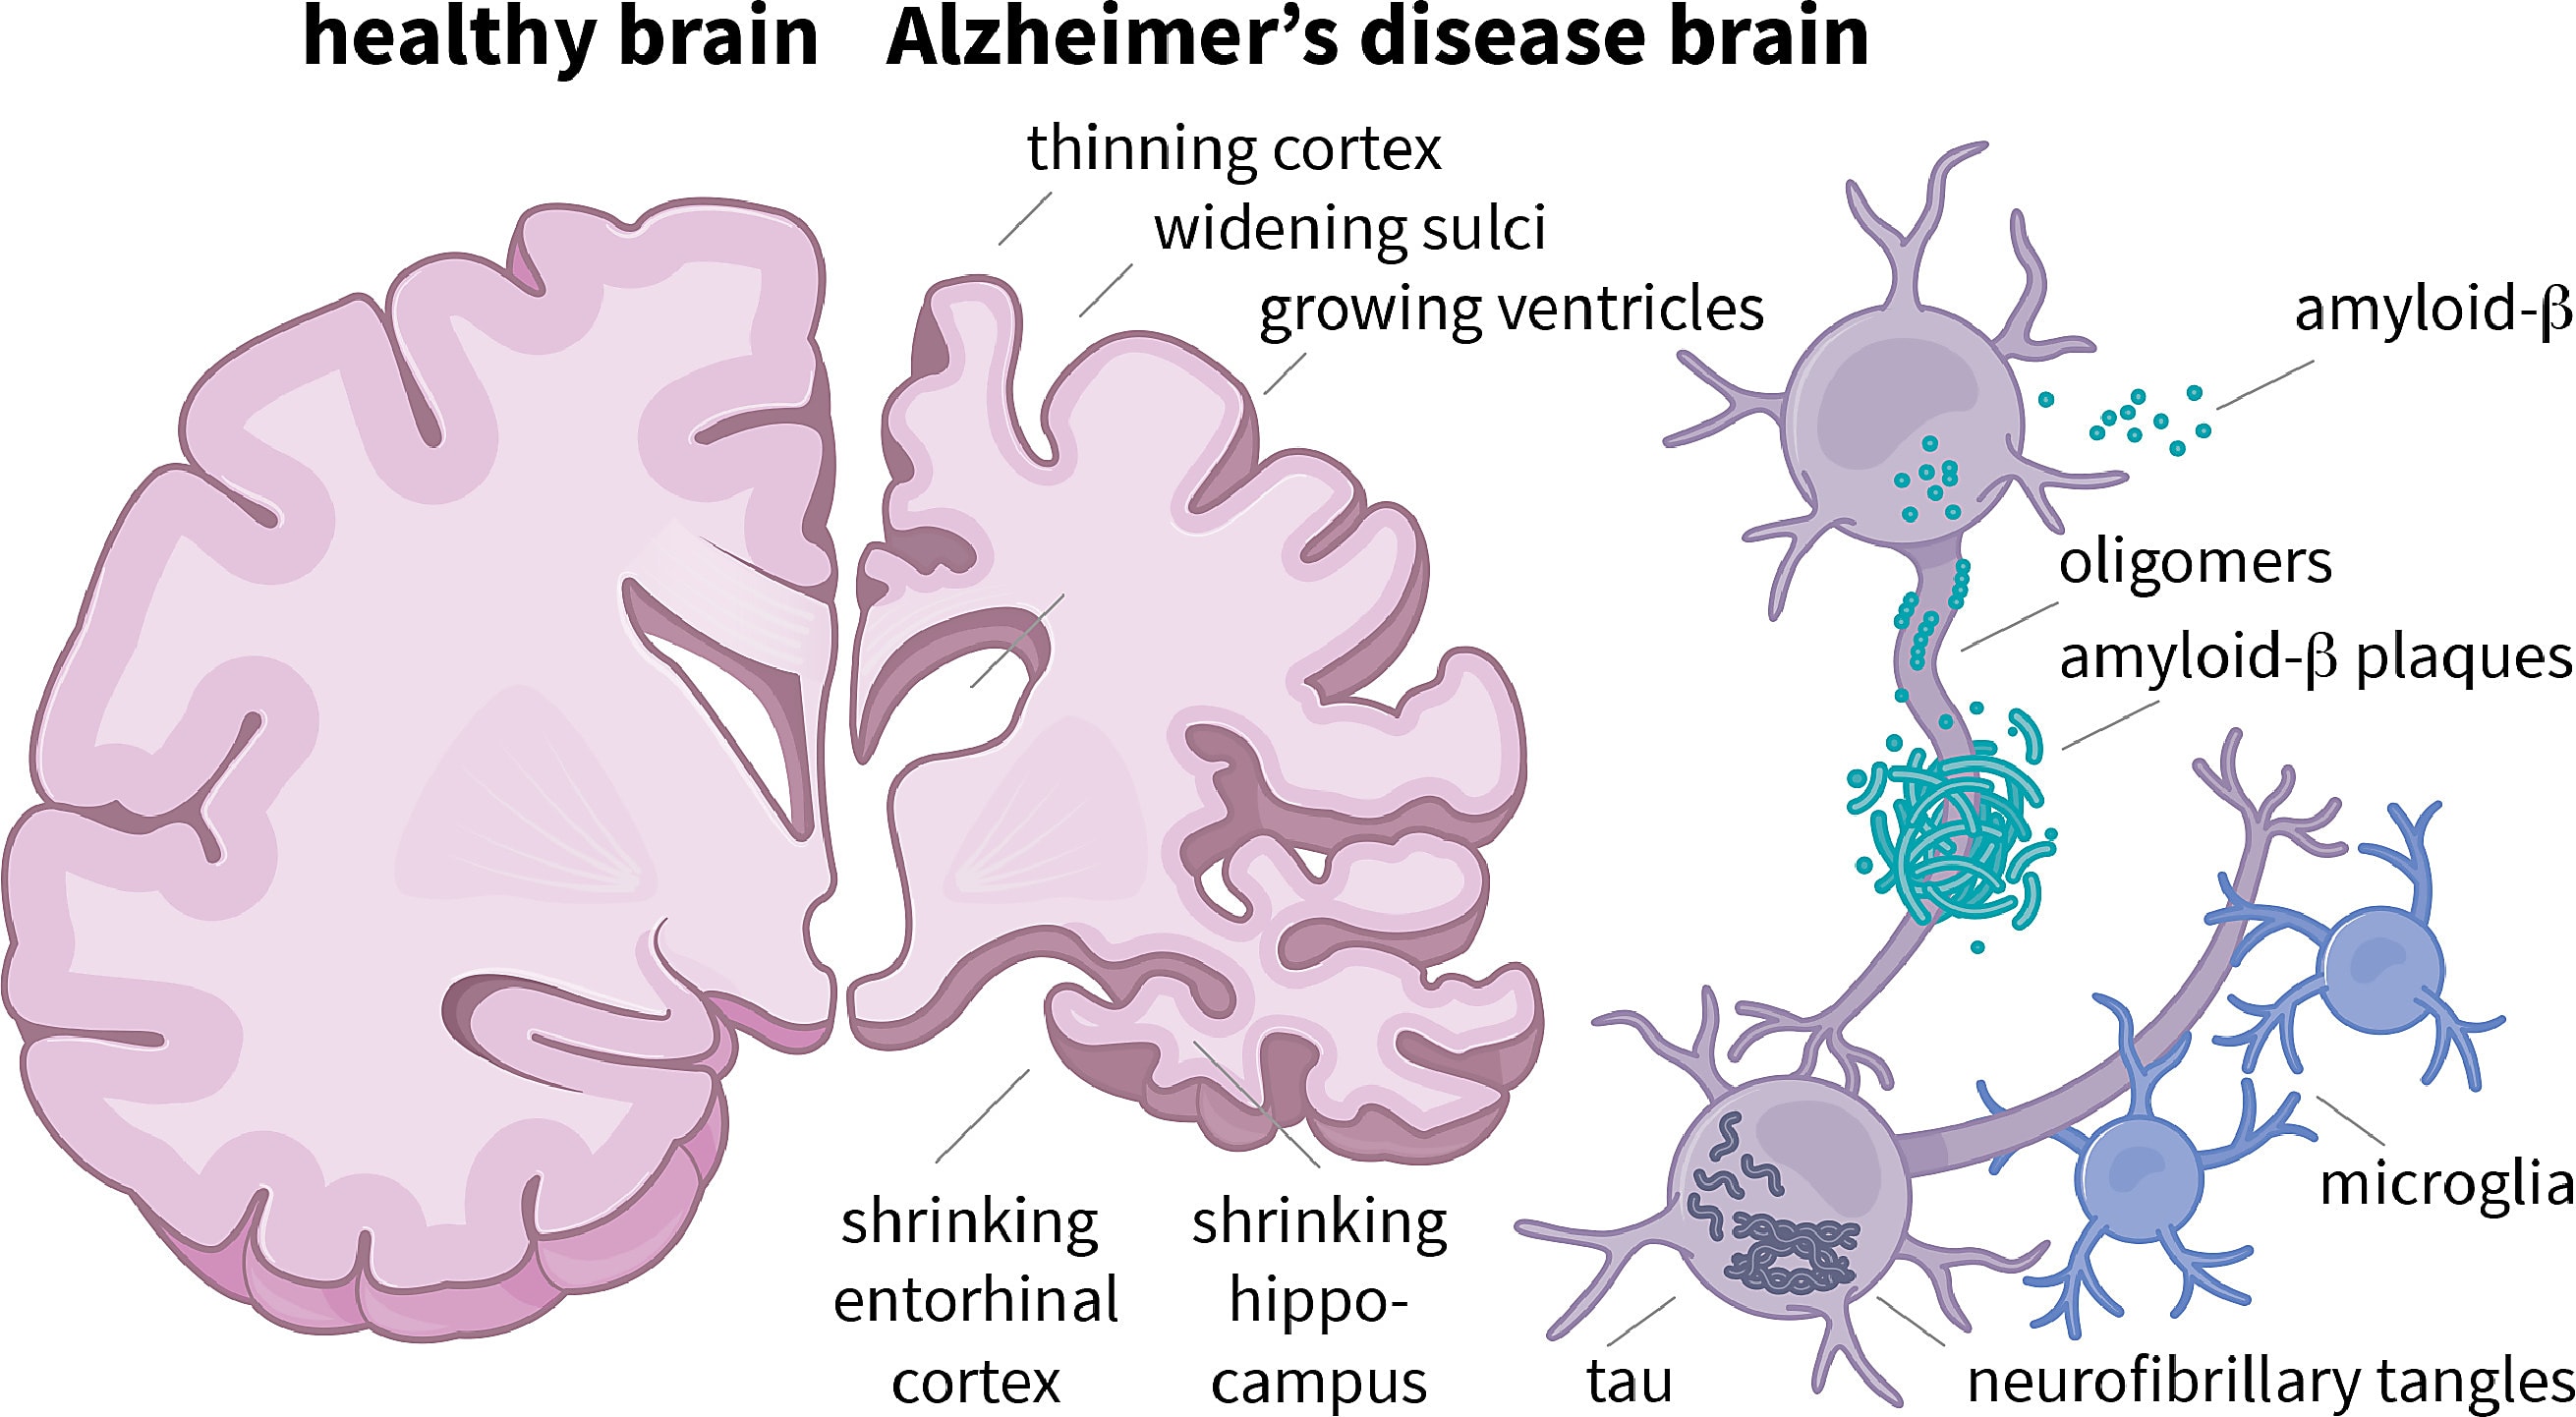 Figure 1. Alzheimer’s disease pathology. Amyloid-beta proteins are produced in neuronal membranes and oligomerize in the extracellular space, ultimately producing amyloid-beta plaques that interfere with neuronal function and trigger inflammation. Neurofibrillary tangles form from aggregates of hyperphosphorylated tau inside neurons, displacing organelles and disrupting vesicular transport required for synaptic transmission. The combined effect of these two events is implicated in the neuronal death and brain atrophy that leads to progressive cognitive decline. Brain Multiphysics 2: 10039 (2021) (4), (CC BY 4.0)